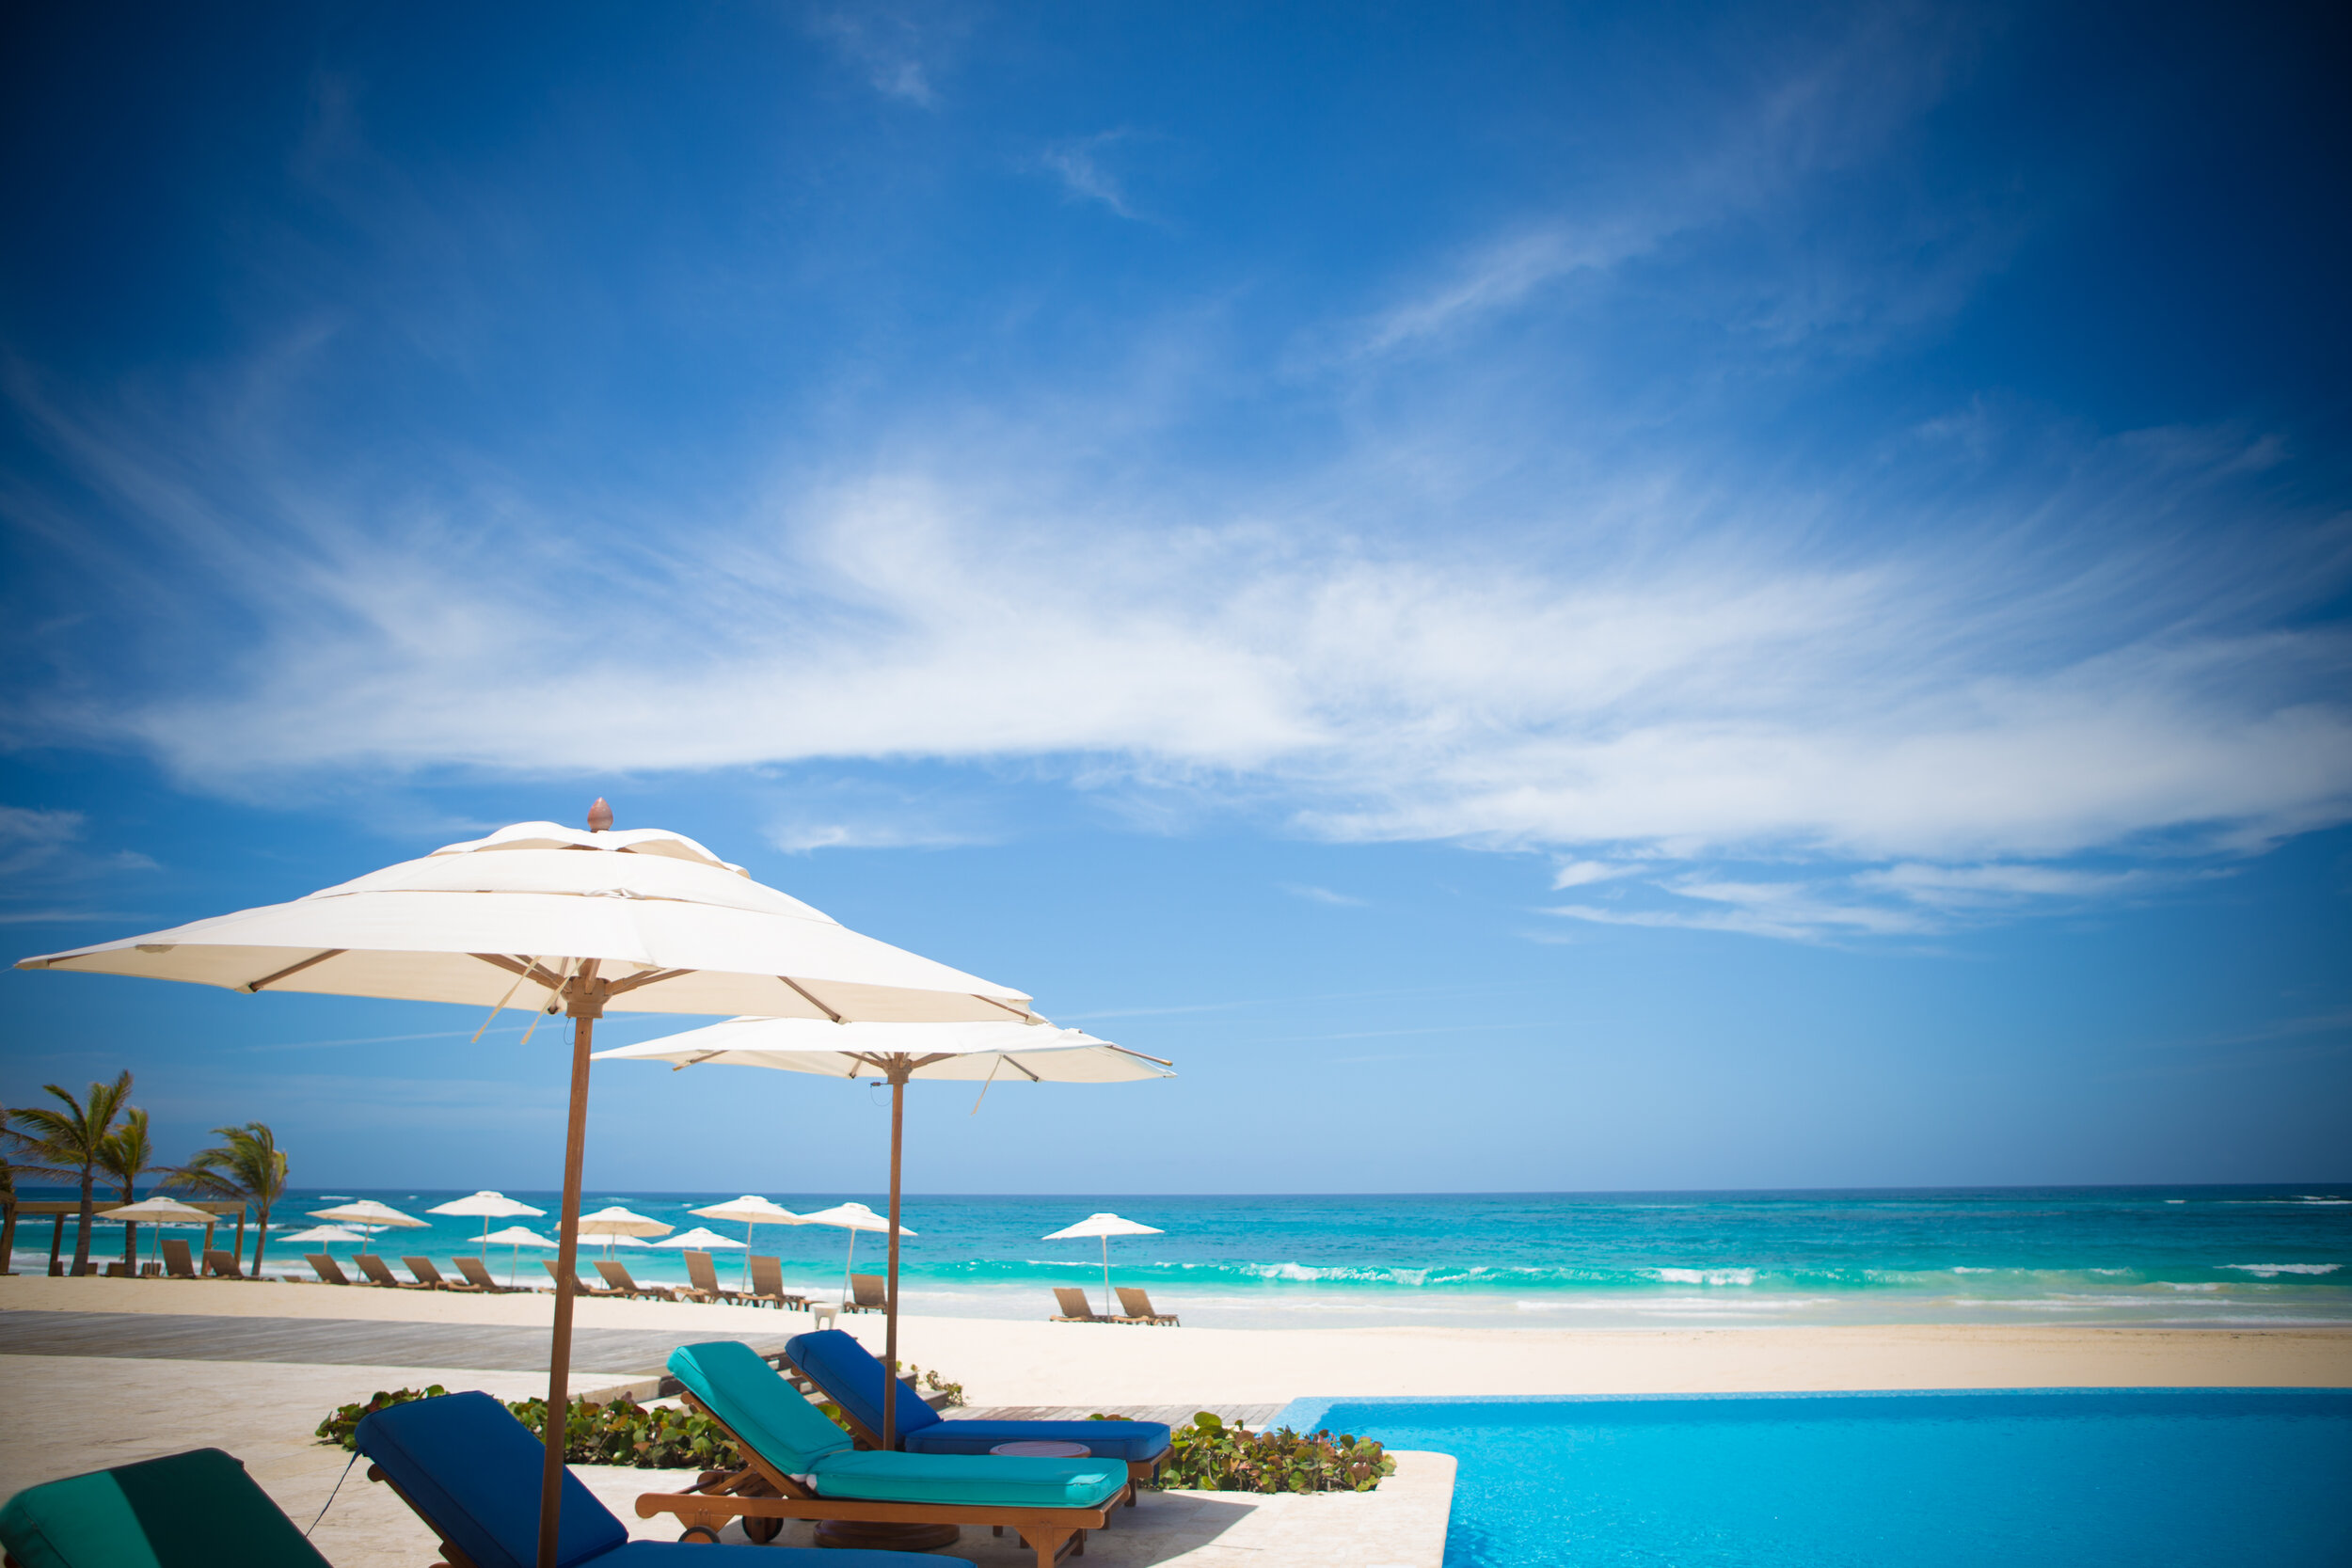 View for Cana Bay Beach Club- one of Punta Cana wedding venues